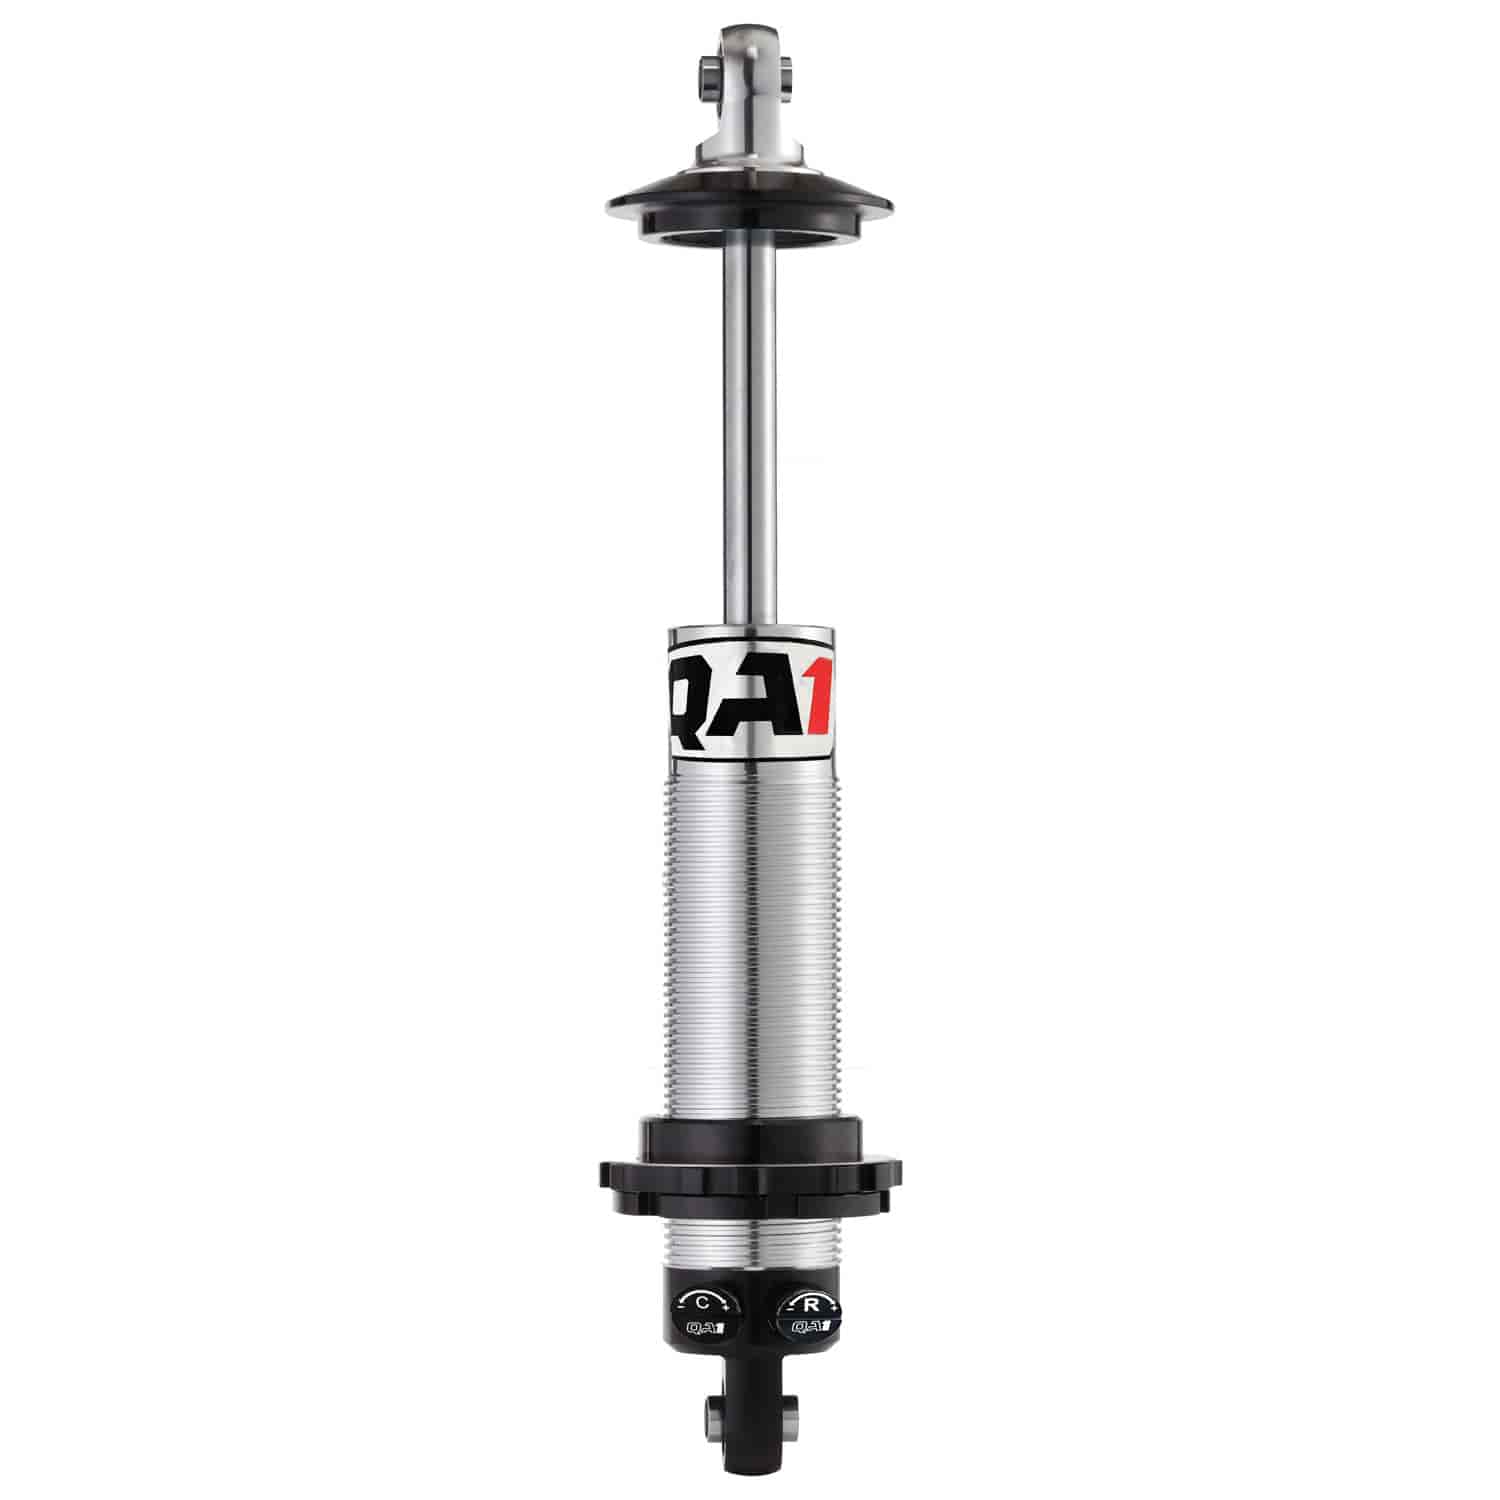 Double Adjustable Shock Compressed Height: 11-5/8"